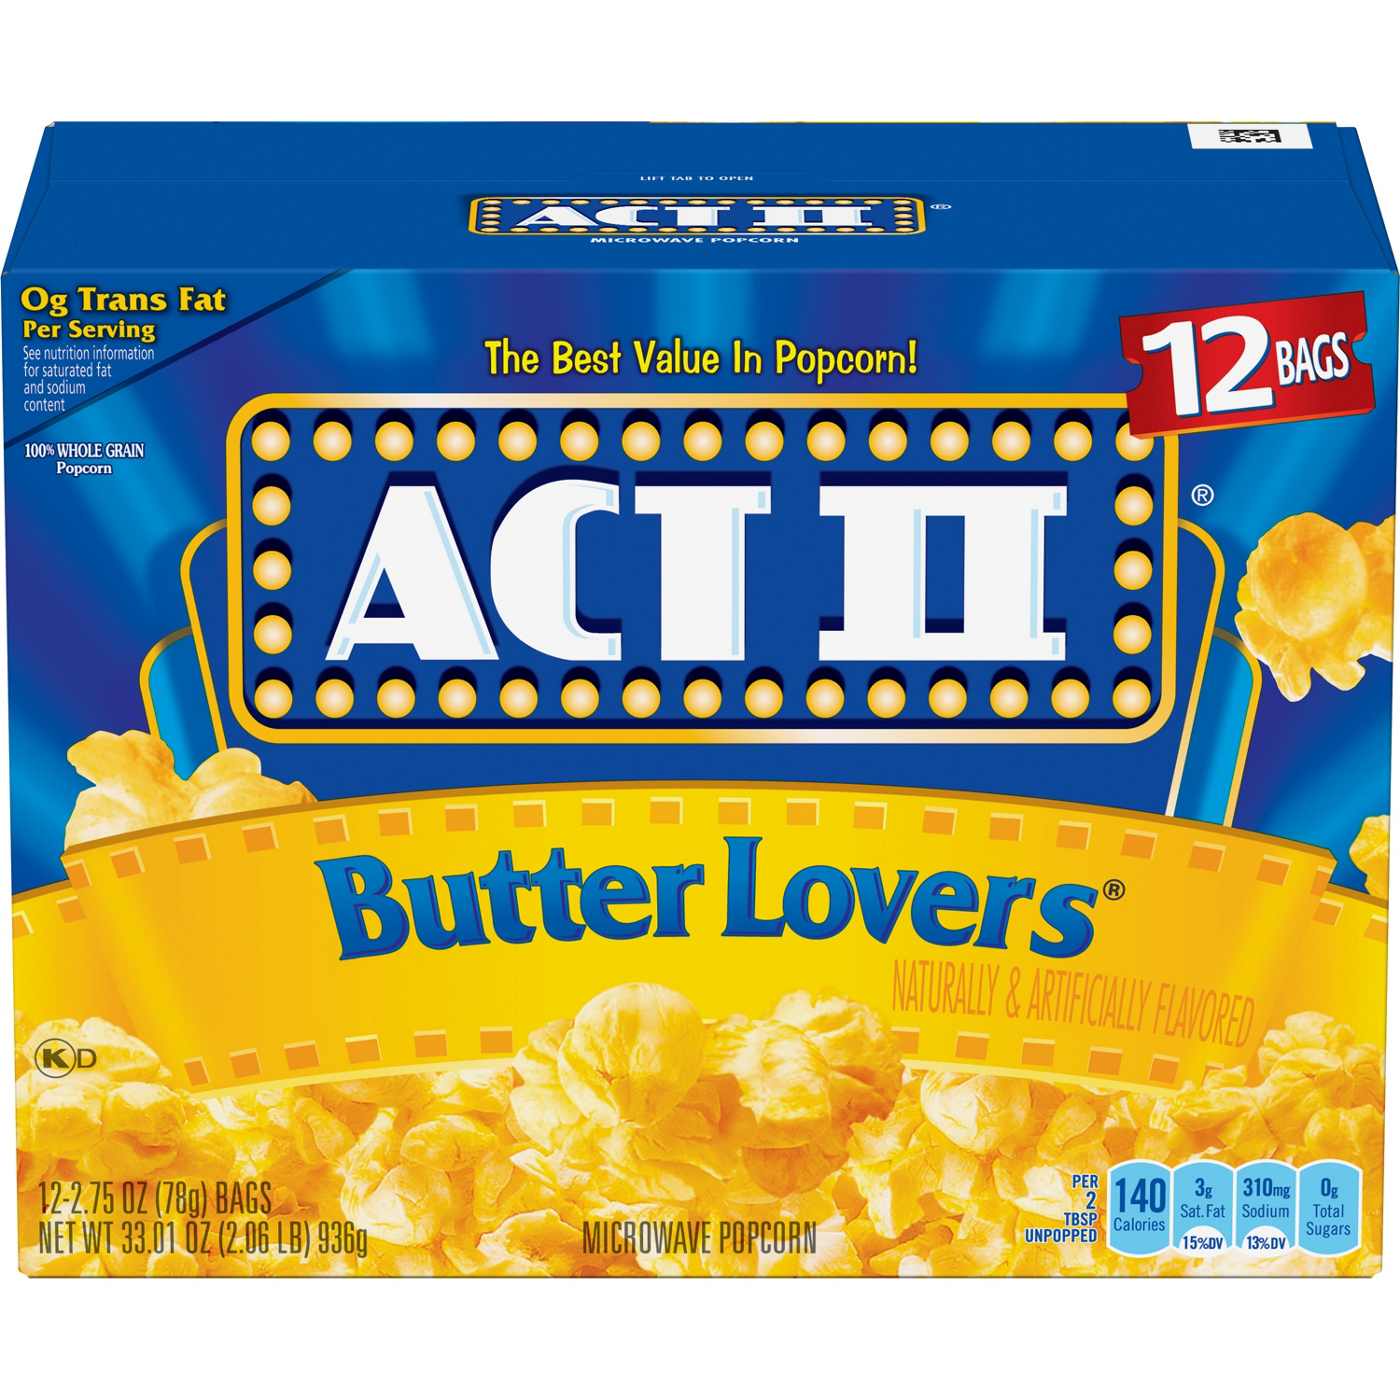 ACT II Butter Lovers Microwave Popcorn; image 1 of 7